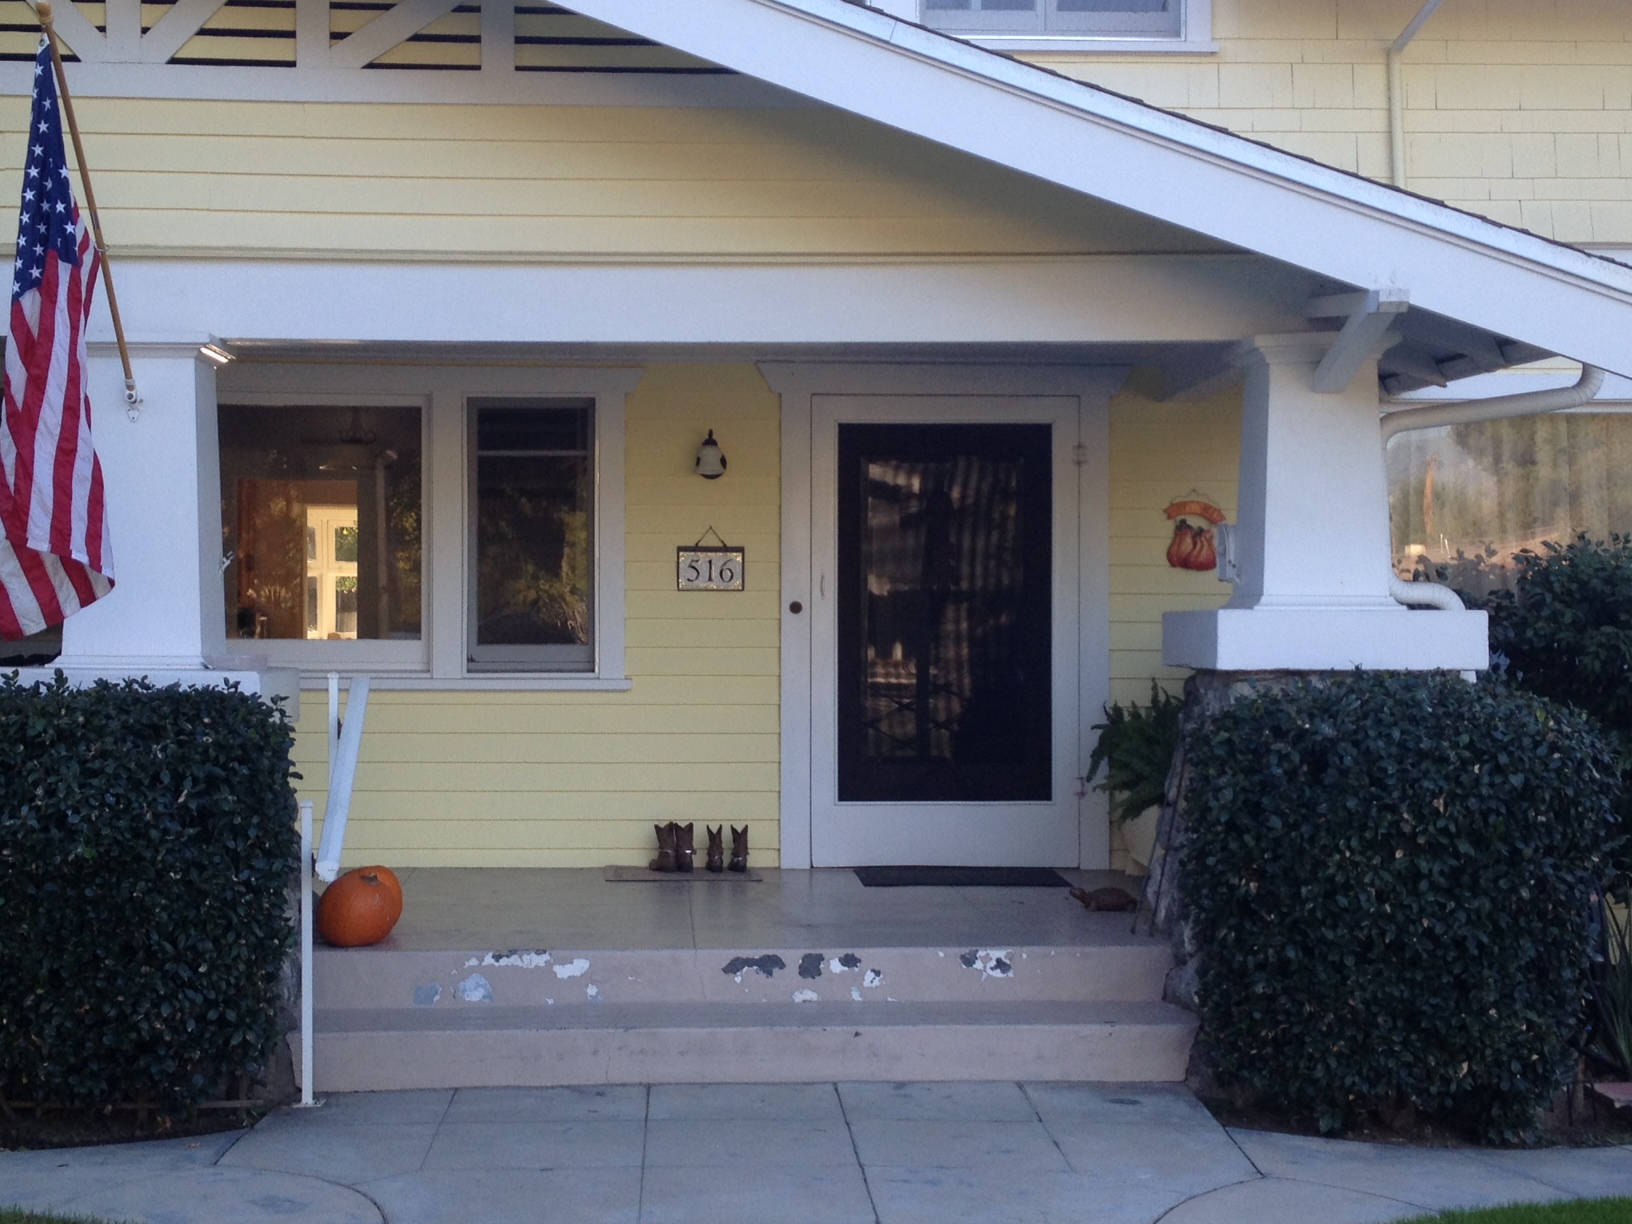 Nutmeg Designs Custom House Number in White and Cream Yellow for a Craftsman Bungalow in California.